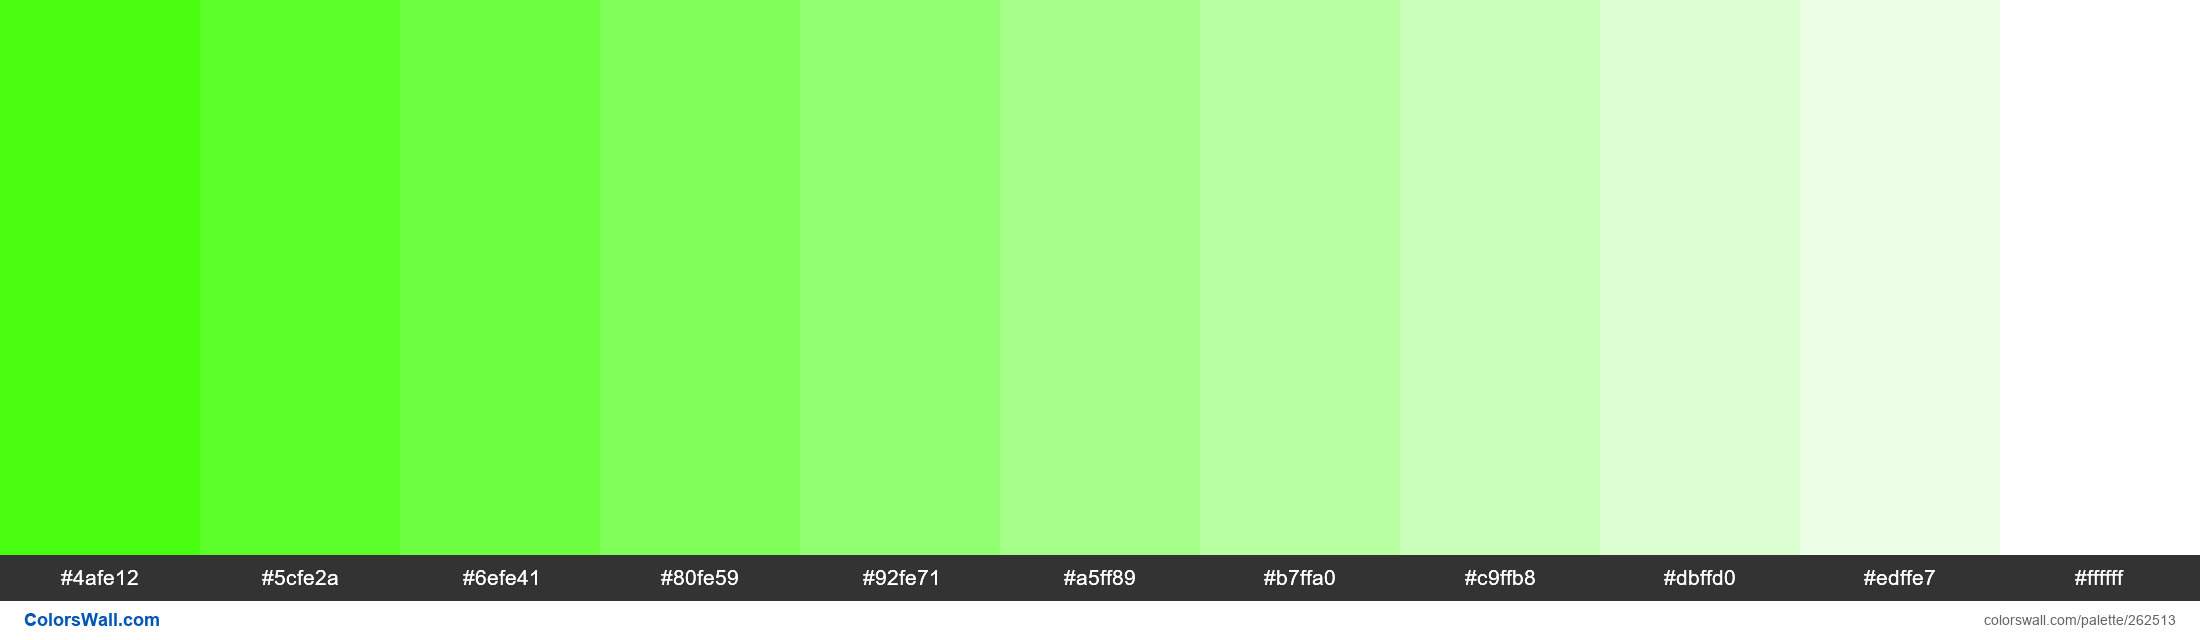 Techno Tinkerbell colors palette - ColorsWall